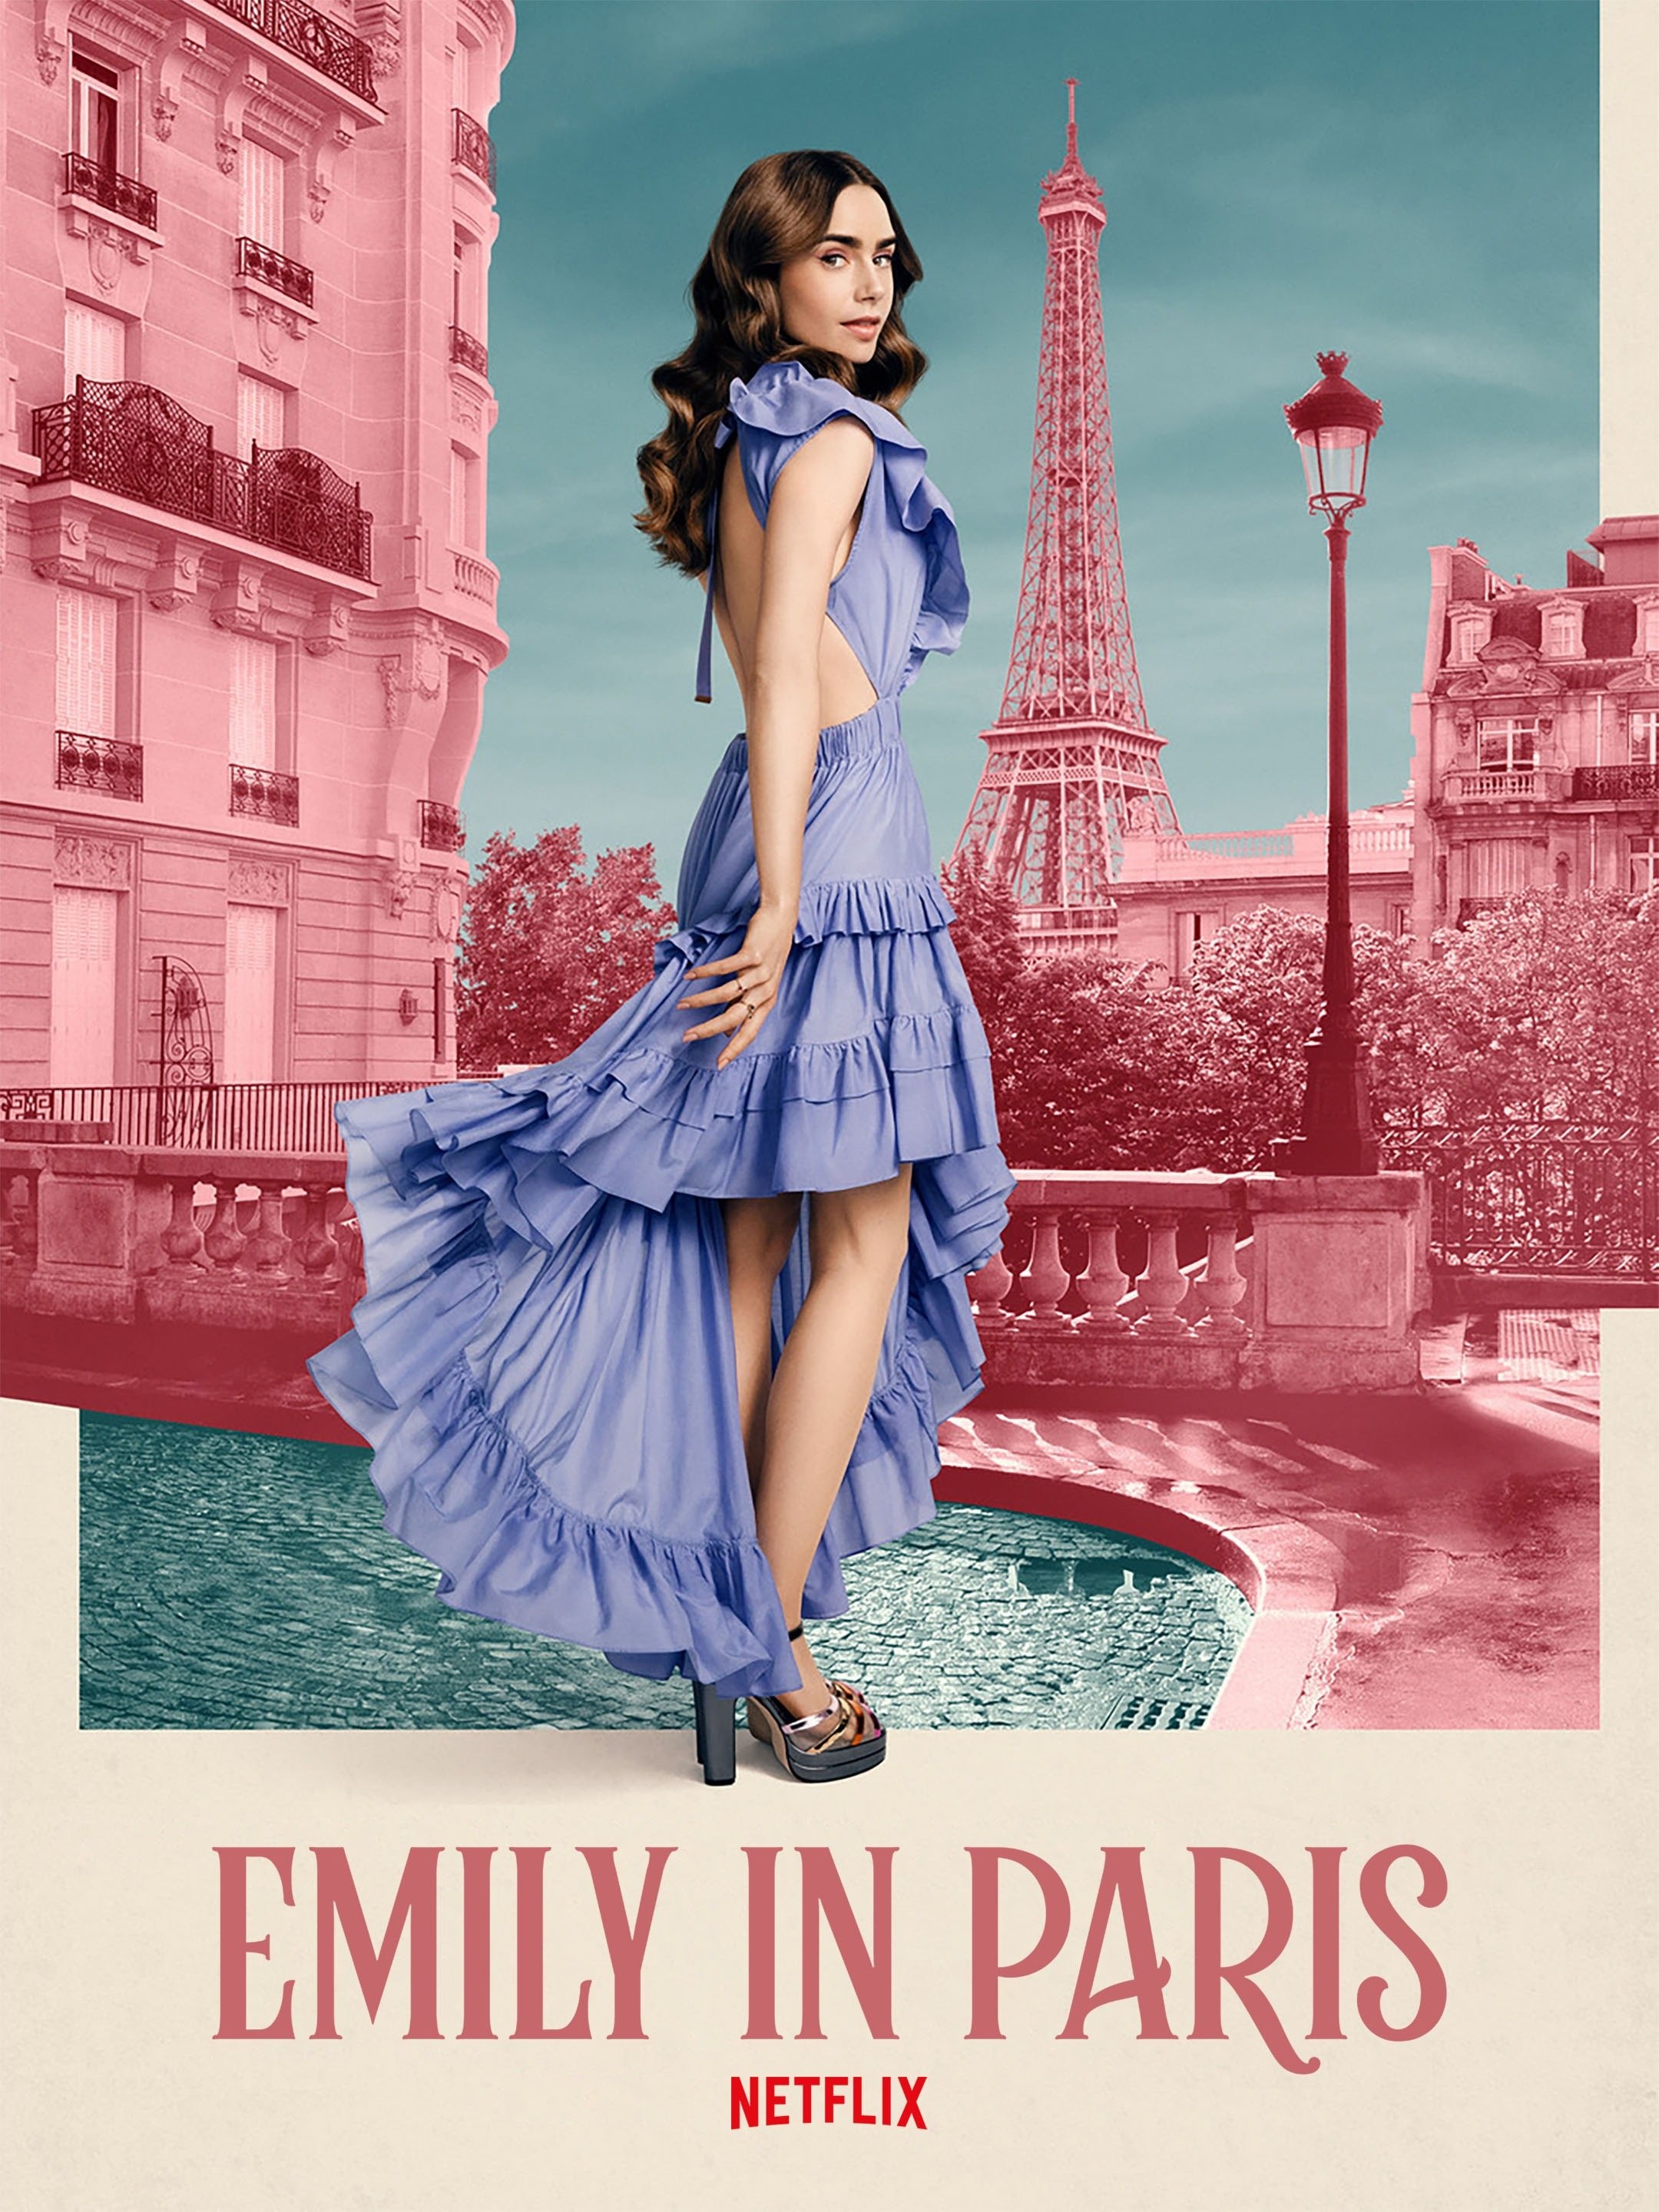 Emily In Paris: Emily's Most Memorable Fashion Moments, Ranked